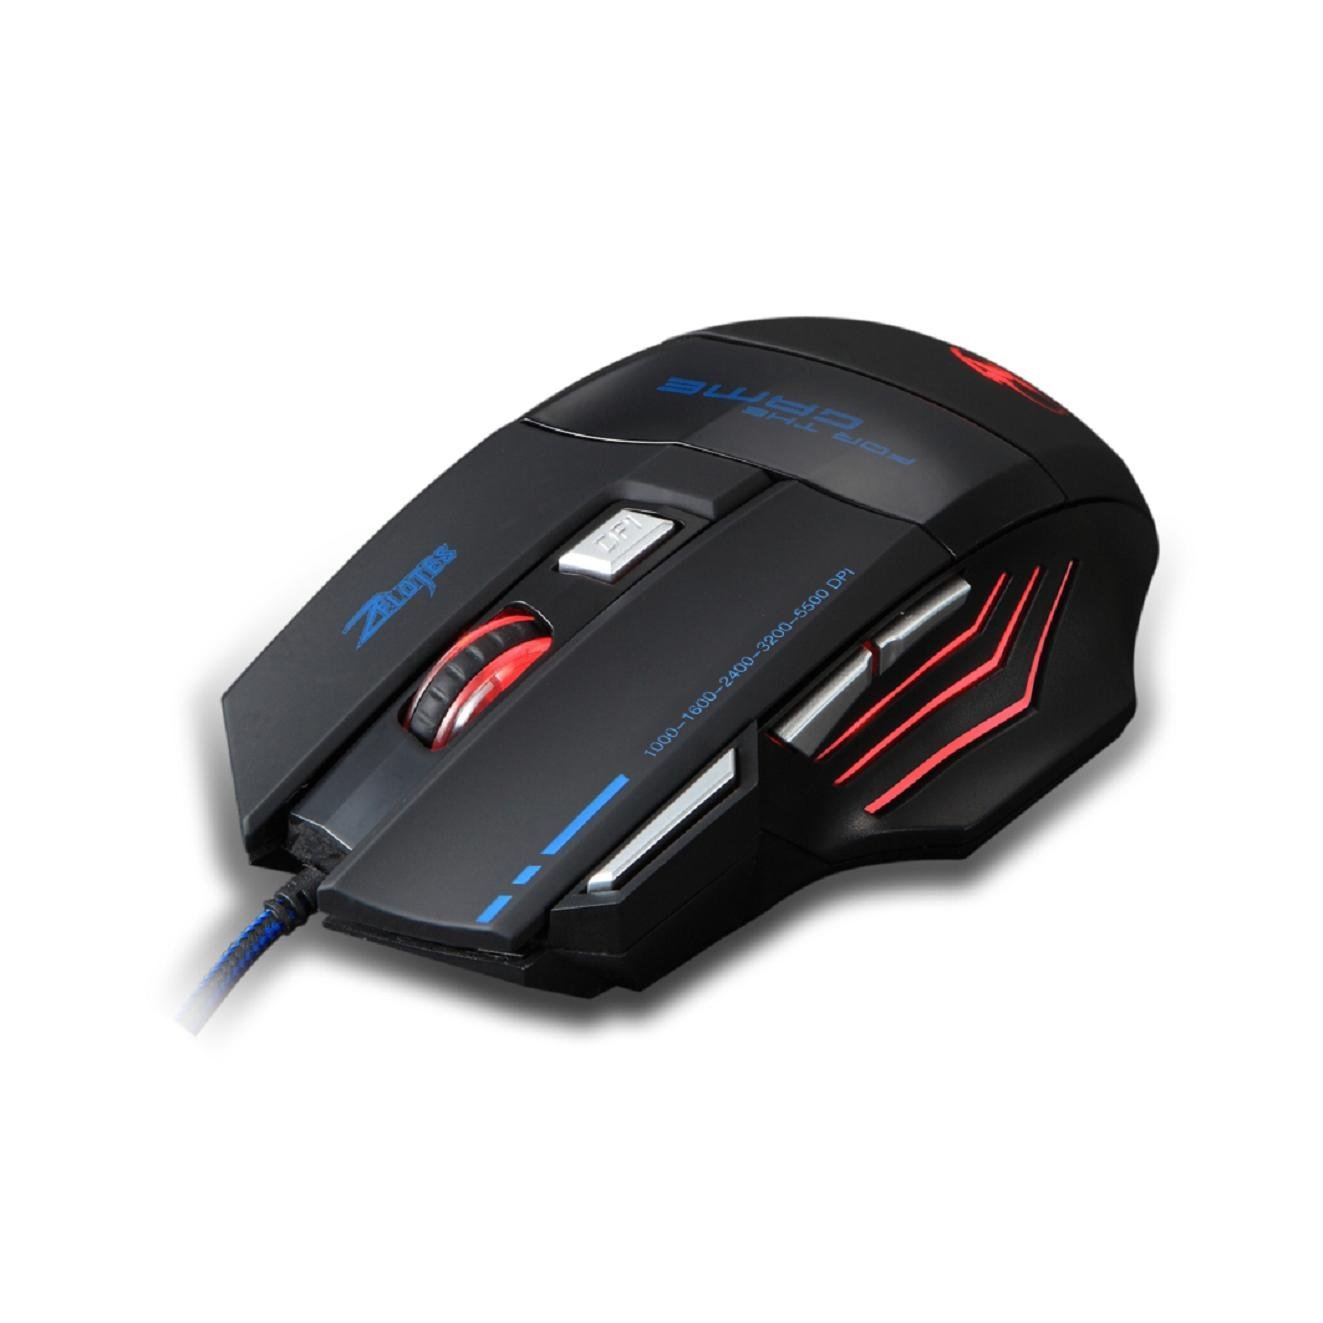 5500DPI Wired Gaming Mouse Professional 7 Buttons USB Cable LED Optical Gamer Mouse for Computer Laptop PC Mice 